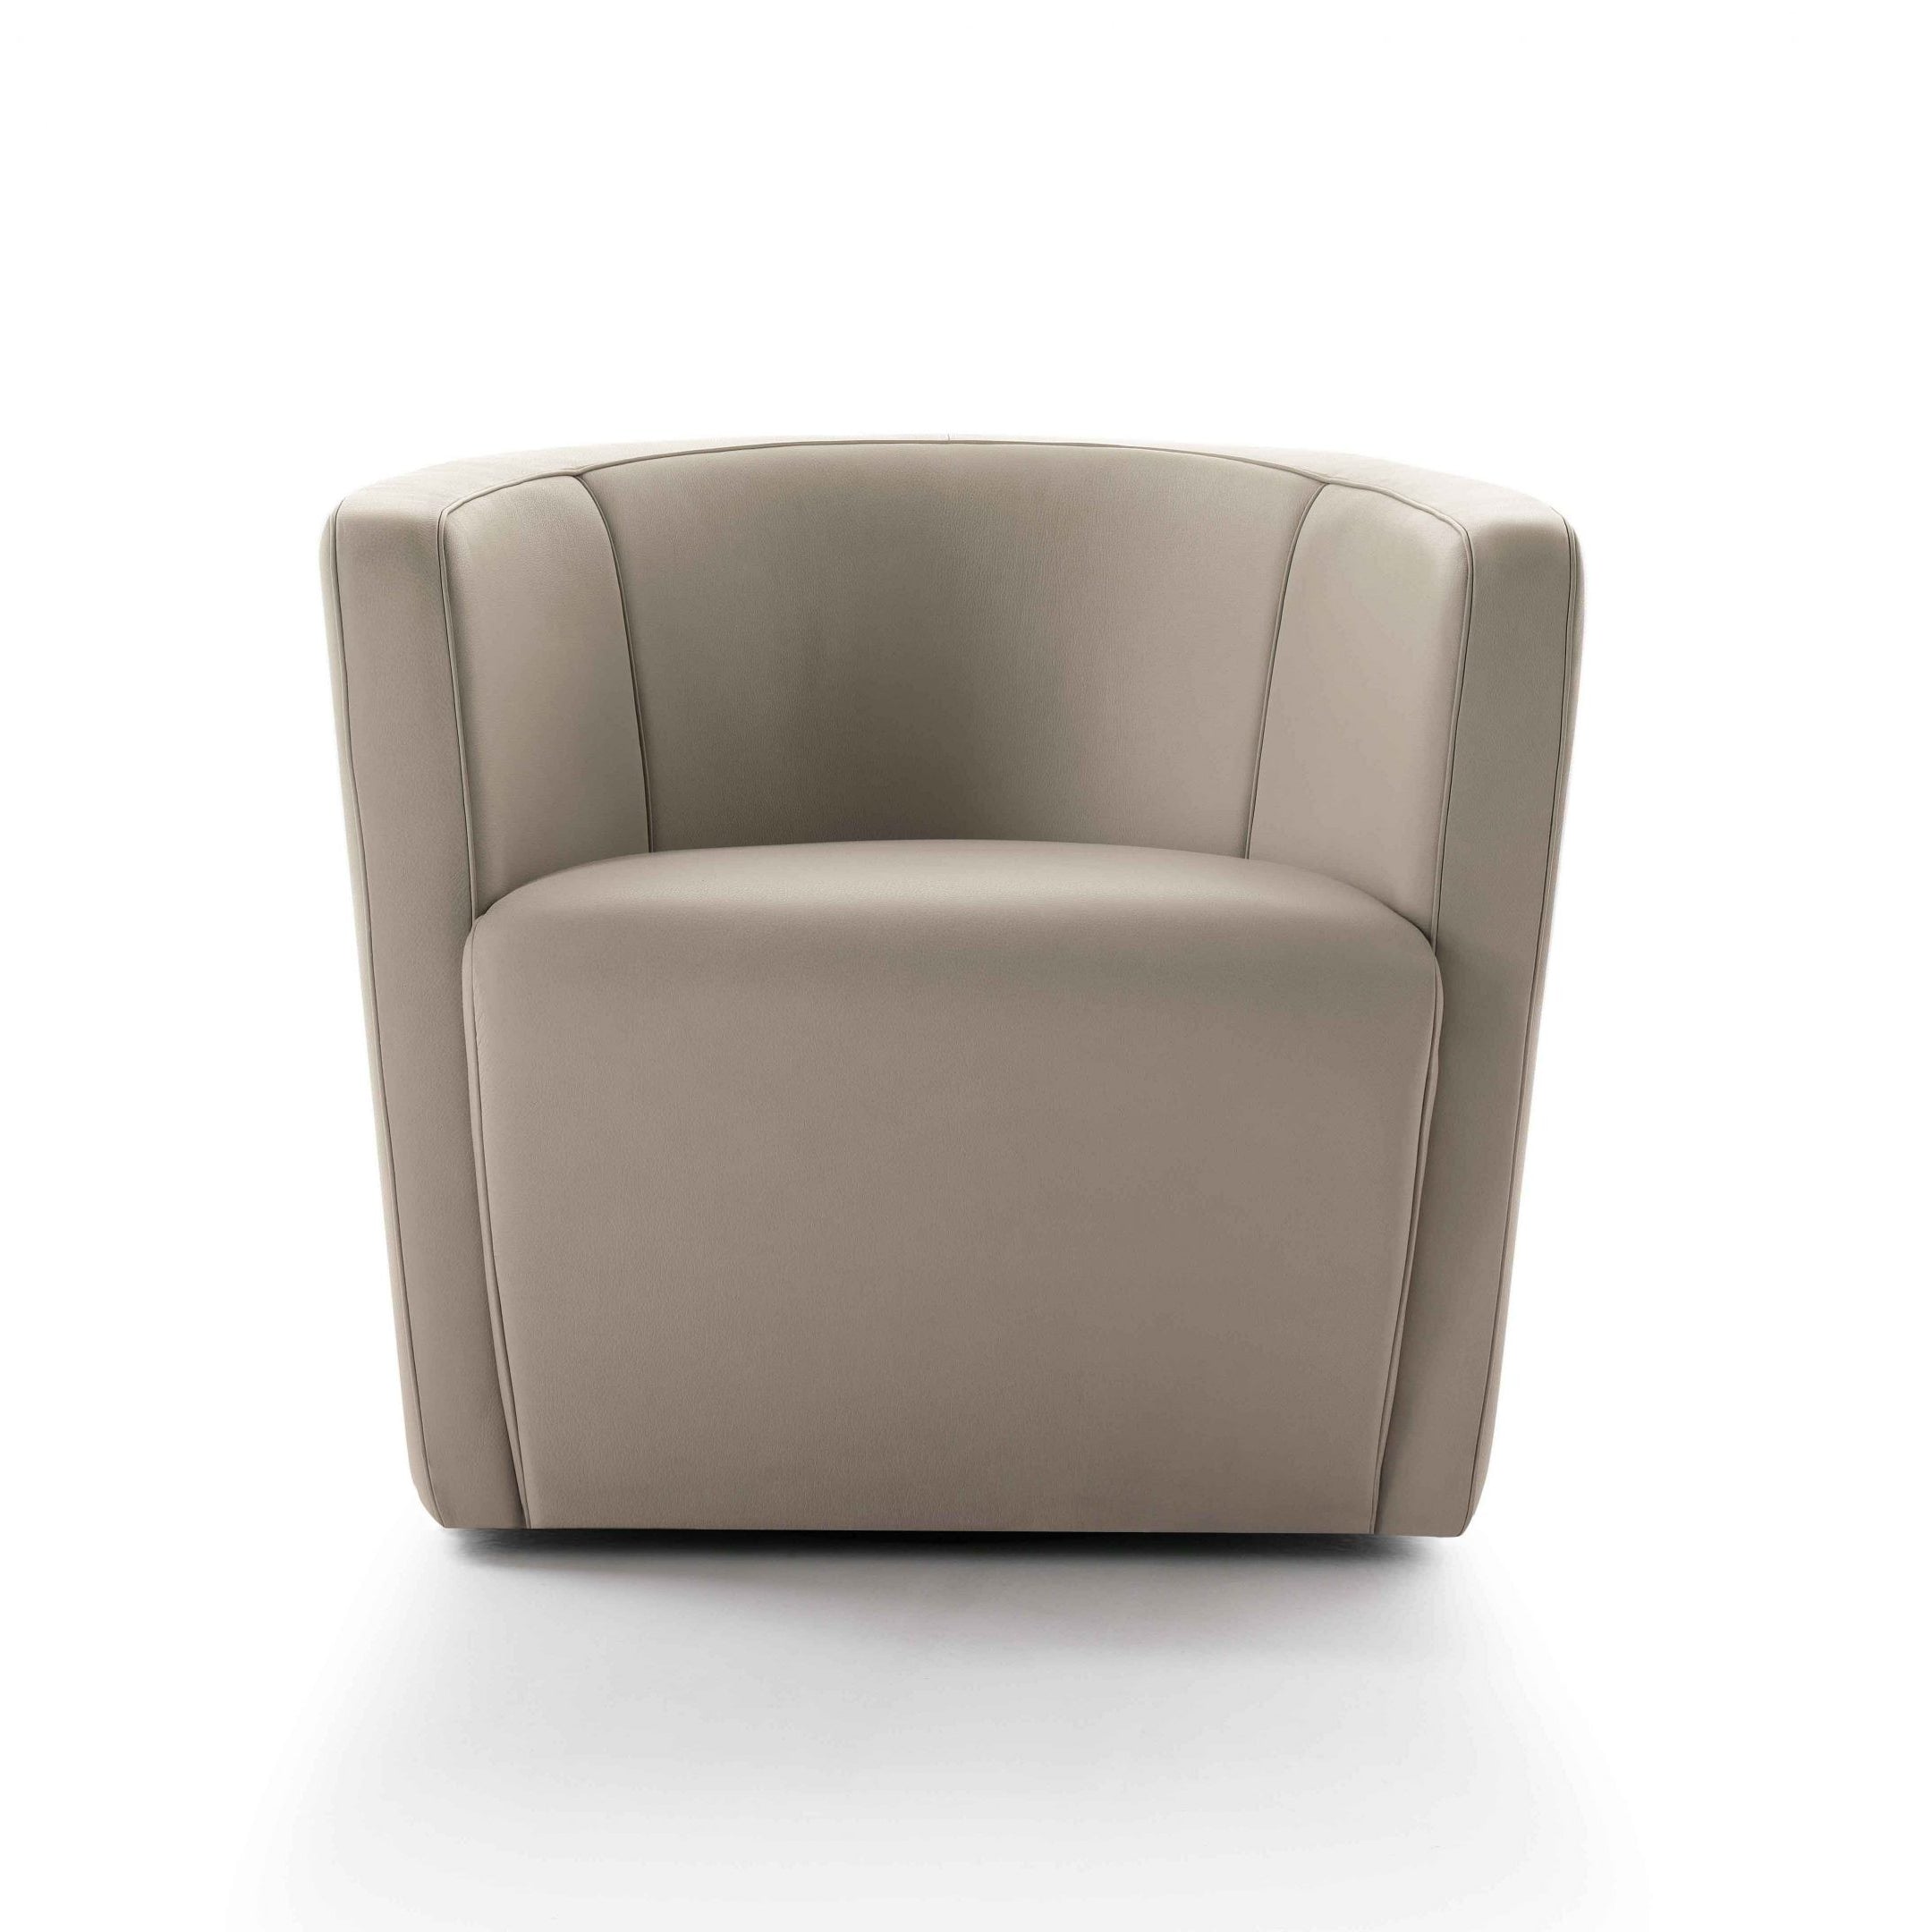 FASHION AFFAIR round low occasional chair4